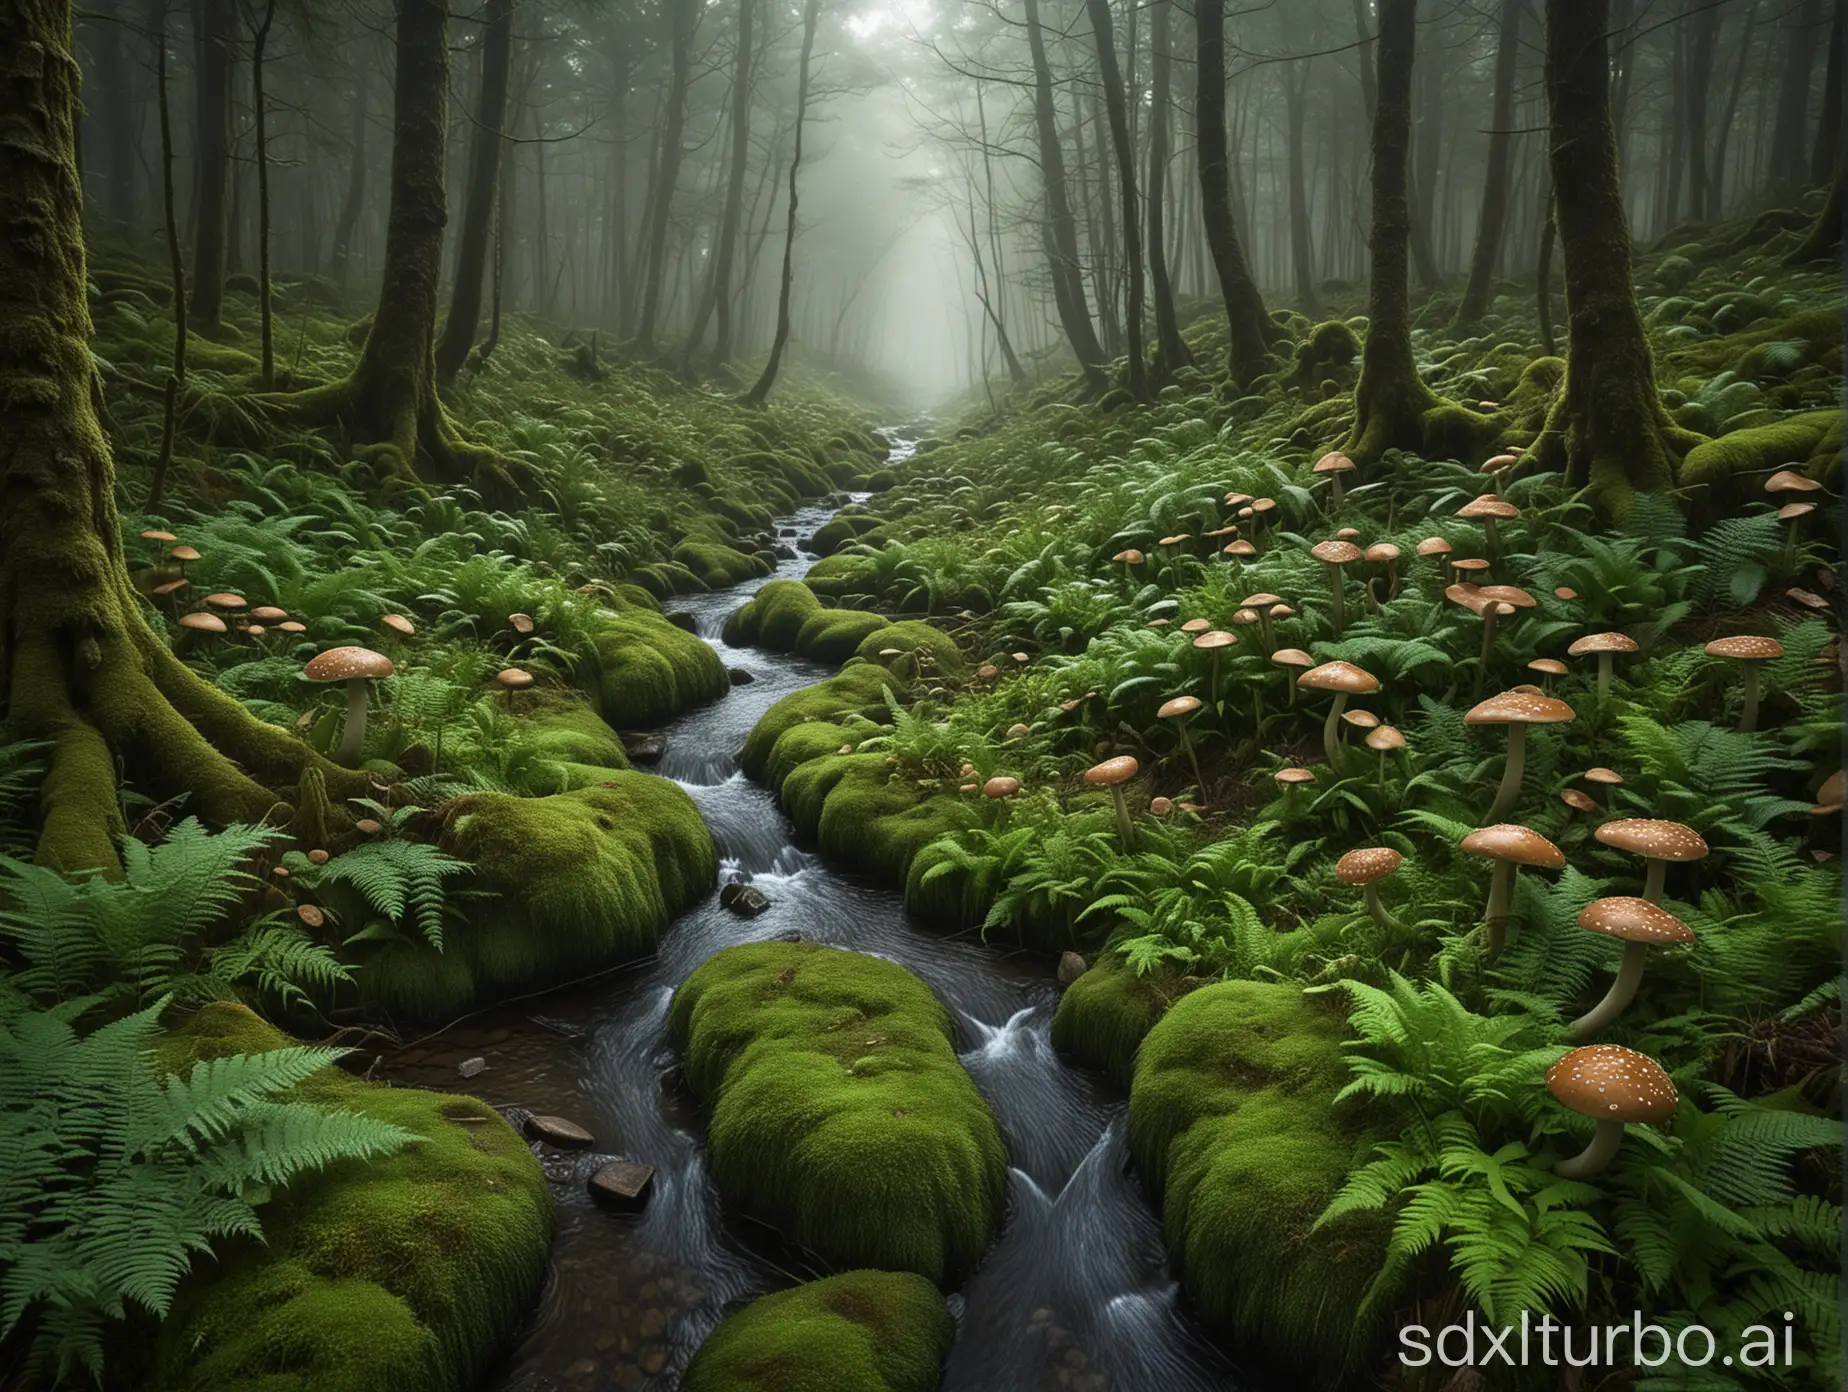 A mesmerizing dark fantasy scene of a serene forest, where mushrooms glow mysteriously amidst the thick green moss and ferns. The ground is blanketed in a soft mist, creating an ethereal ambiance. A gentle, meandering stream gracefully weaves through the scene. The overall atmosphere of the image exudes tranquility, harmony, and peace, transporting the viewer into a world of enchantment and wonder., dark fantasy